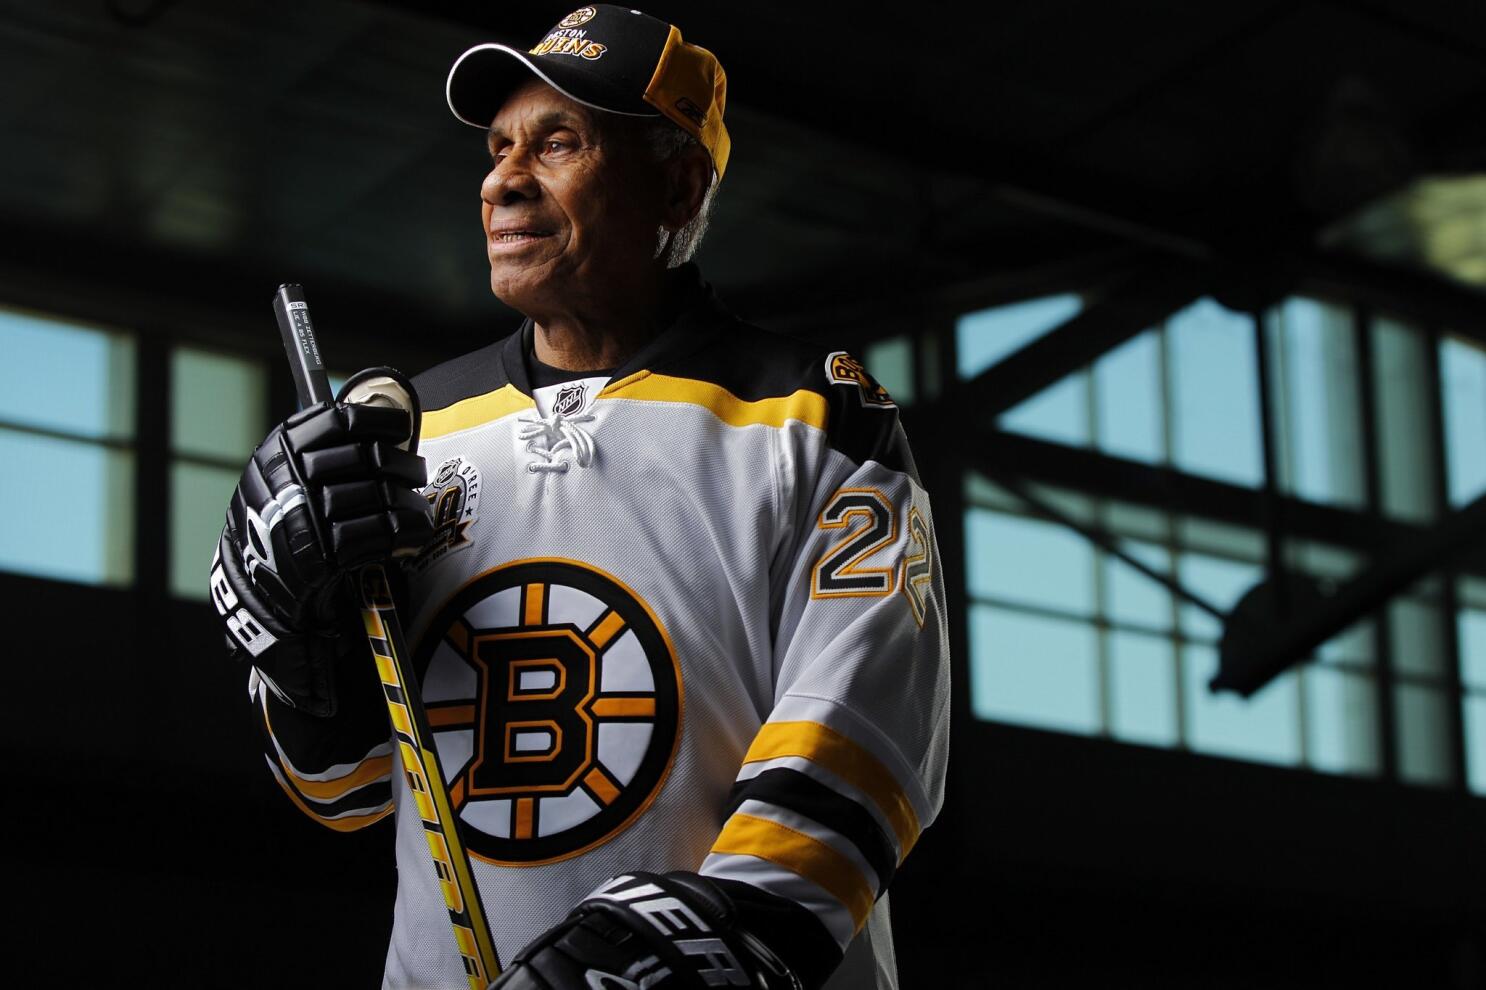 Willie O'Ree remembers his groundbreaking NHL debut like it was